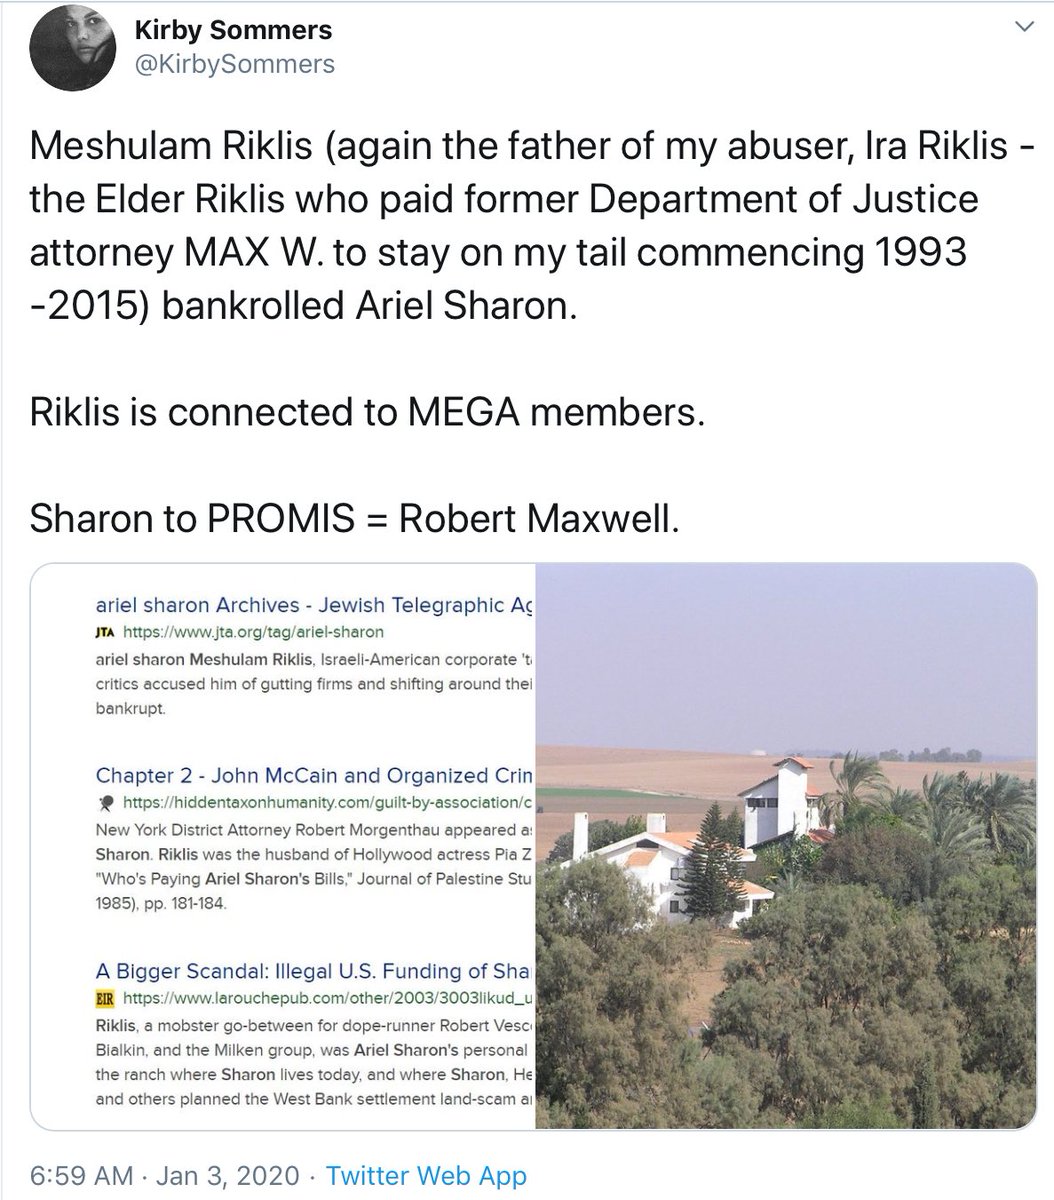 From “legendary financier Meshulam Riklis” in 2003 to hiring former DOJ attorney “stay on her tail” from 1993-2015. Will the real Kirby Sommers please stand up?  https://twitter.com/nine11inreverse/status/1275066878323392521?s=21  https://twitter.com/nine11inreverse/status/1275066878323392521